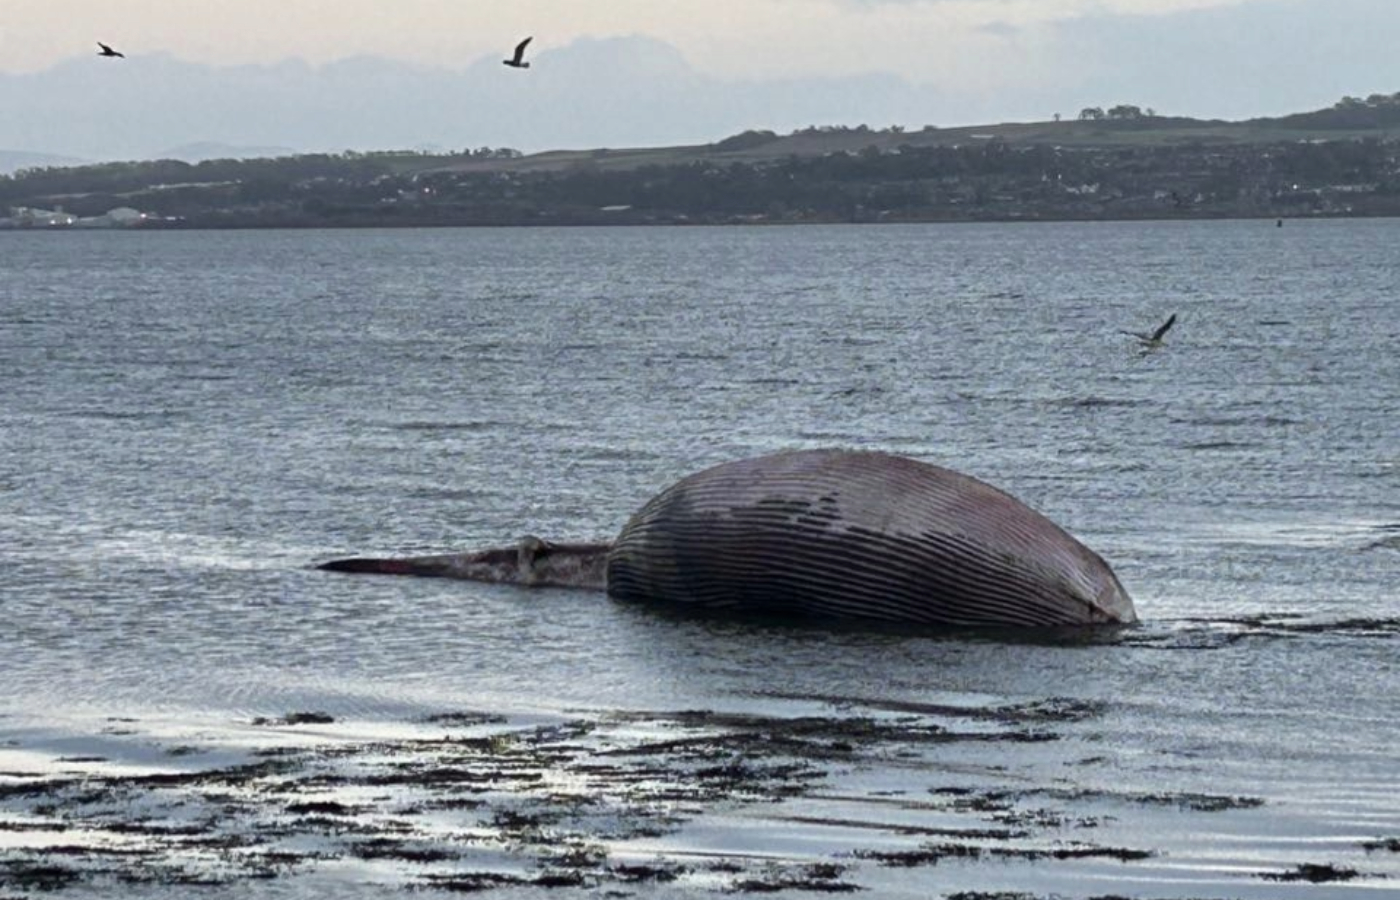 An onlooker captured the washed up mammal on the shoreline. Photo: Culross Stables Community Hub/Facebook